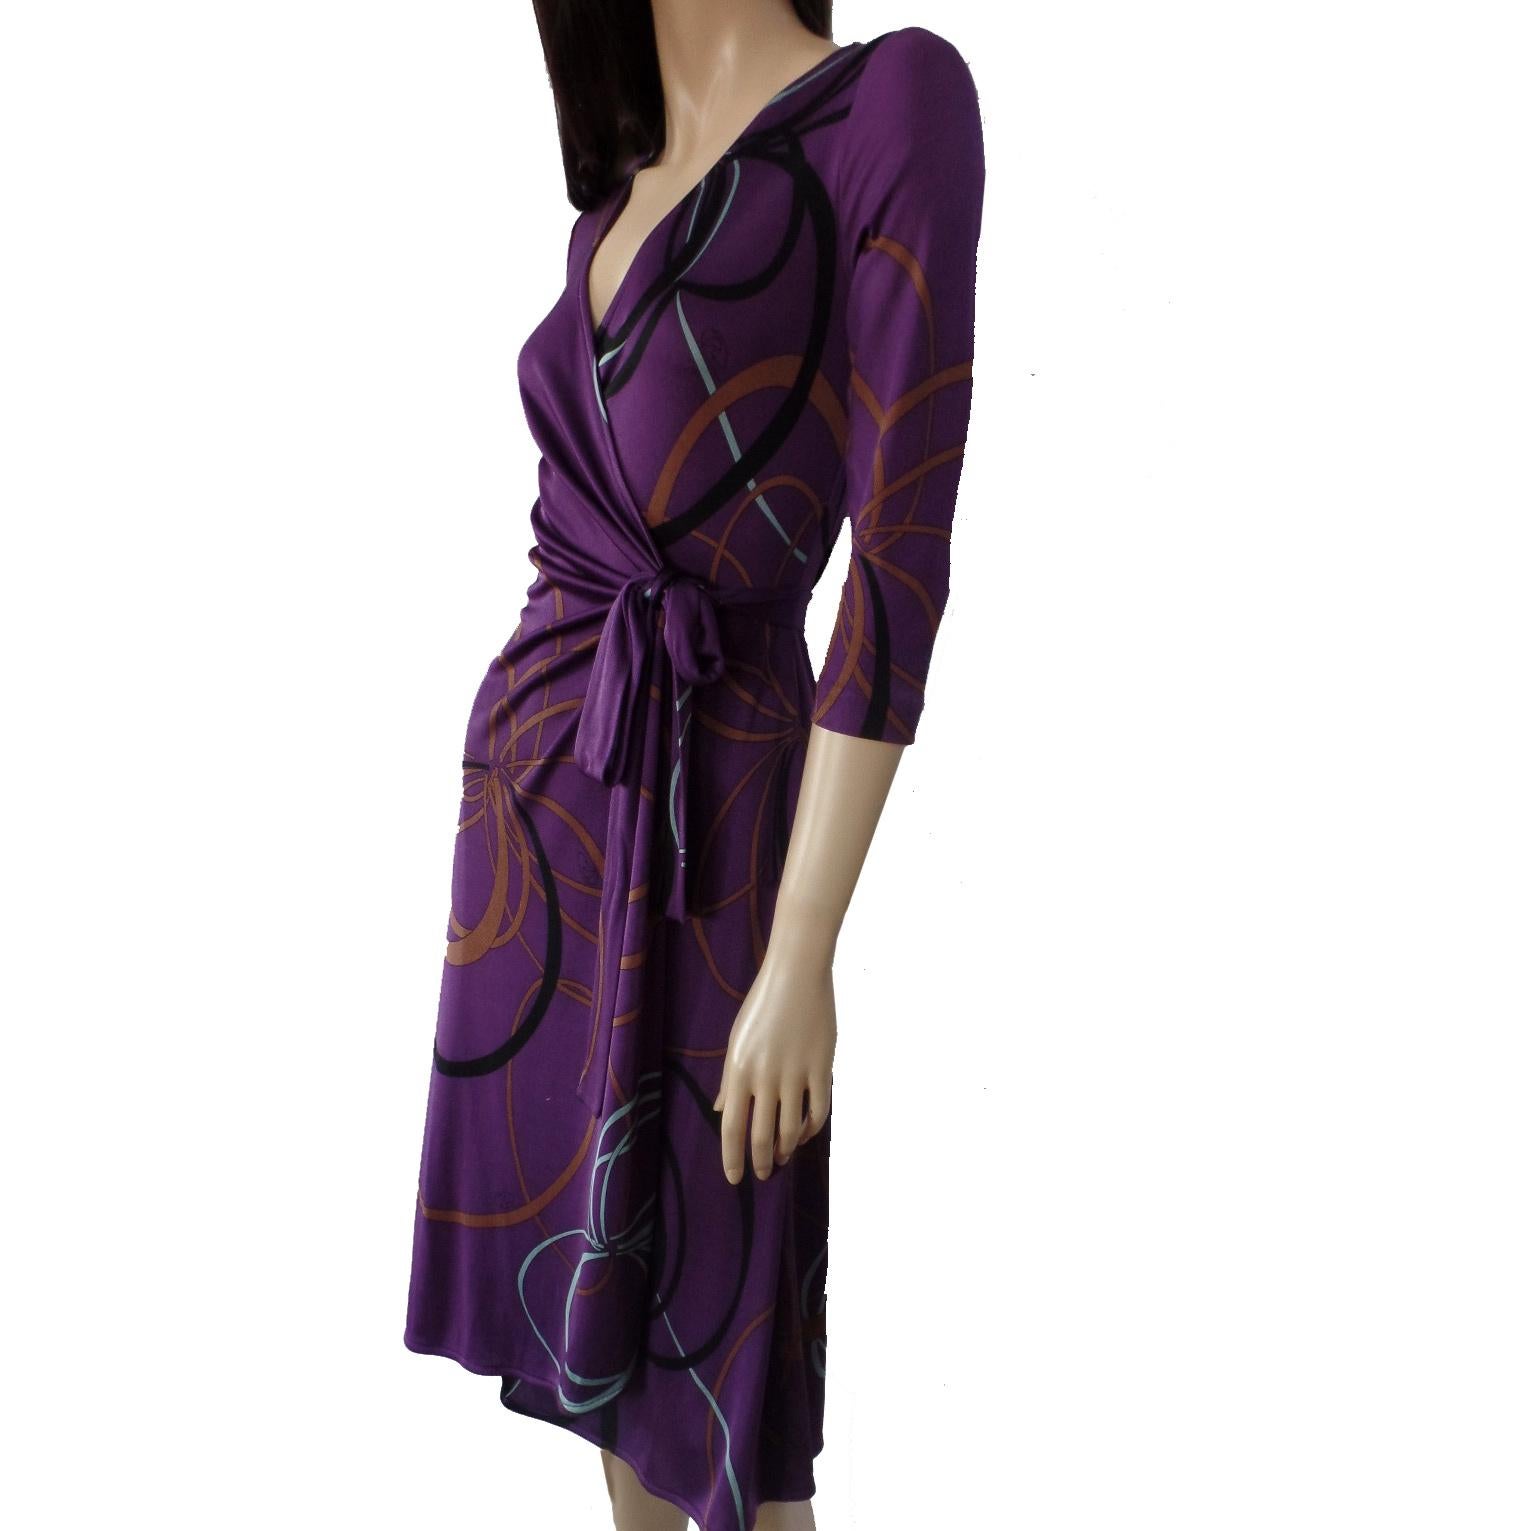 True wrap dress in original rich purple ribbon print.
3/4 sleeves and flattering flared wrap skirt.
Approximately 43